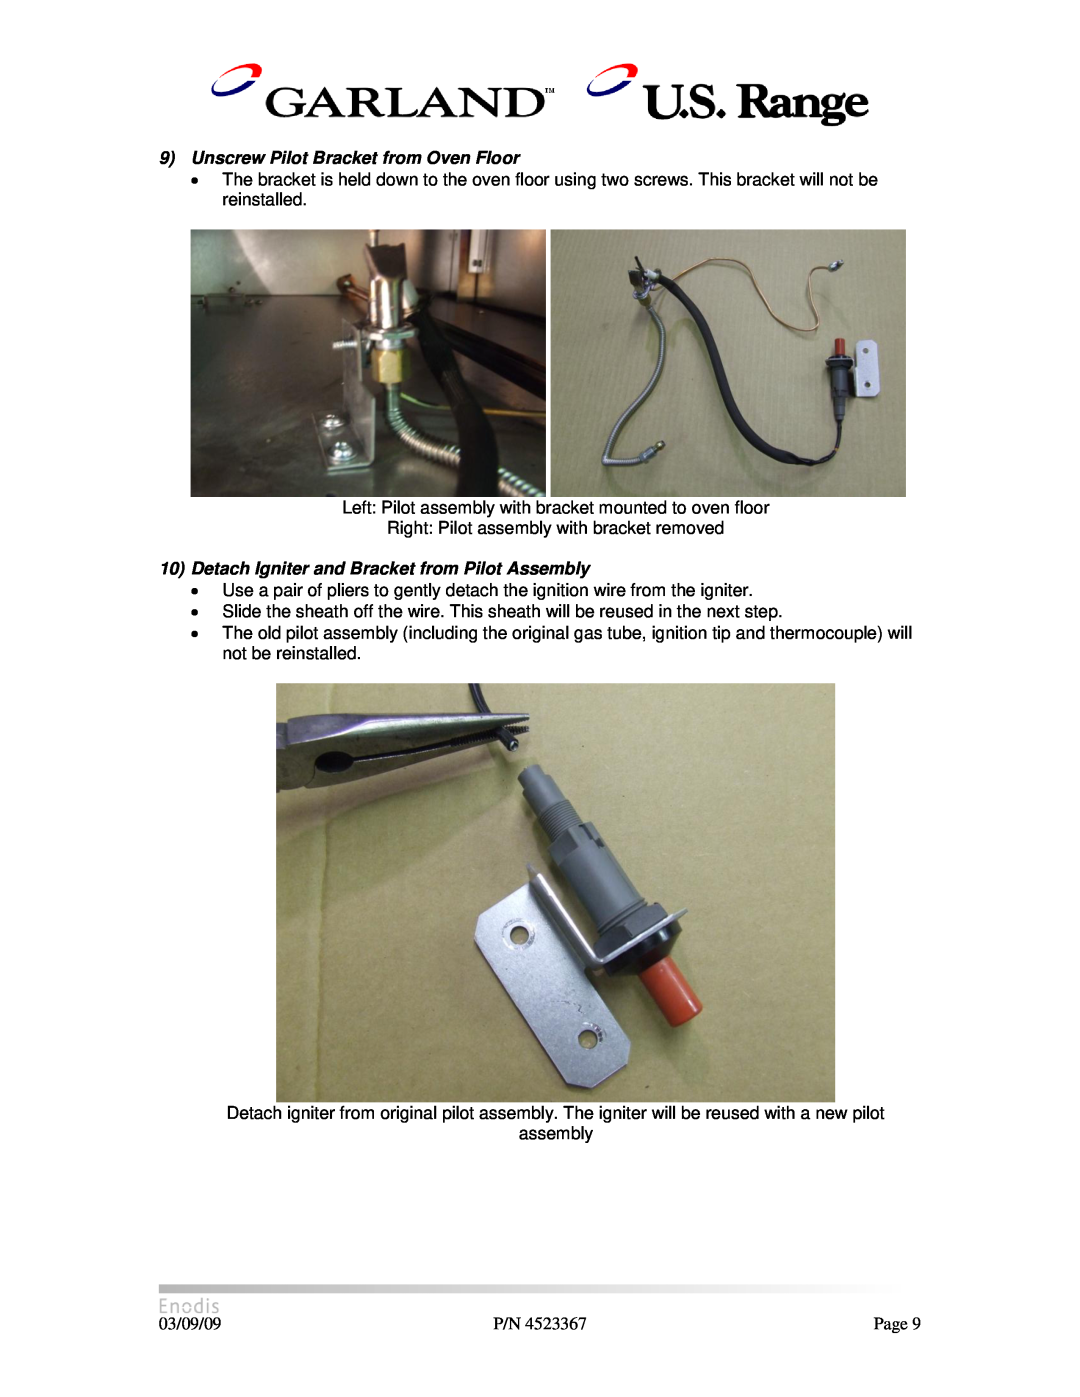 Garland H280 manual Unscrew Pilot Bracket from Oven Floor, Detach Igniter and Bracket from Pilot Assembly 